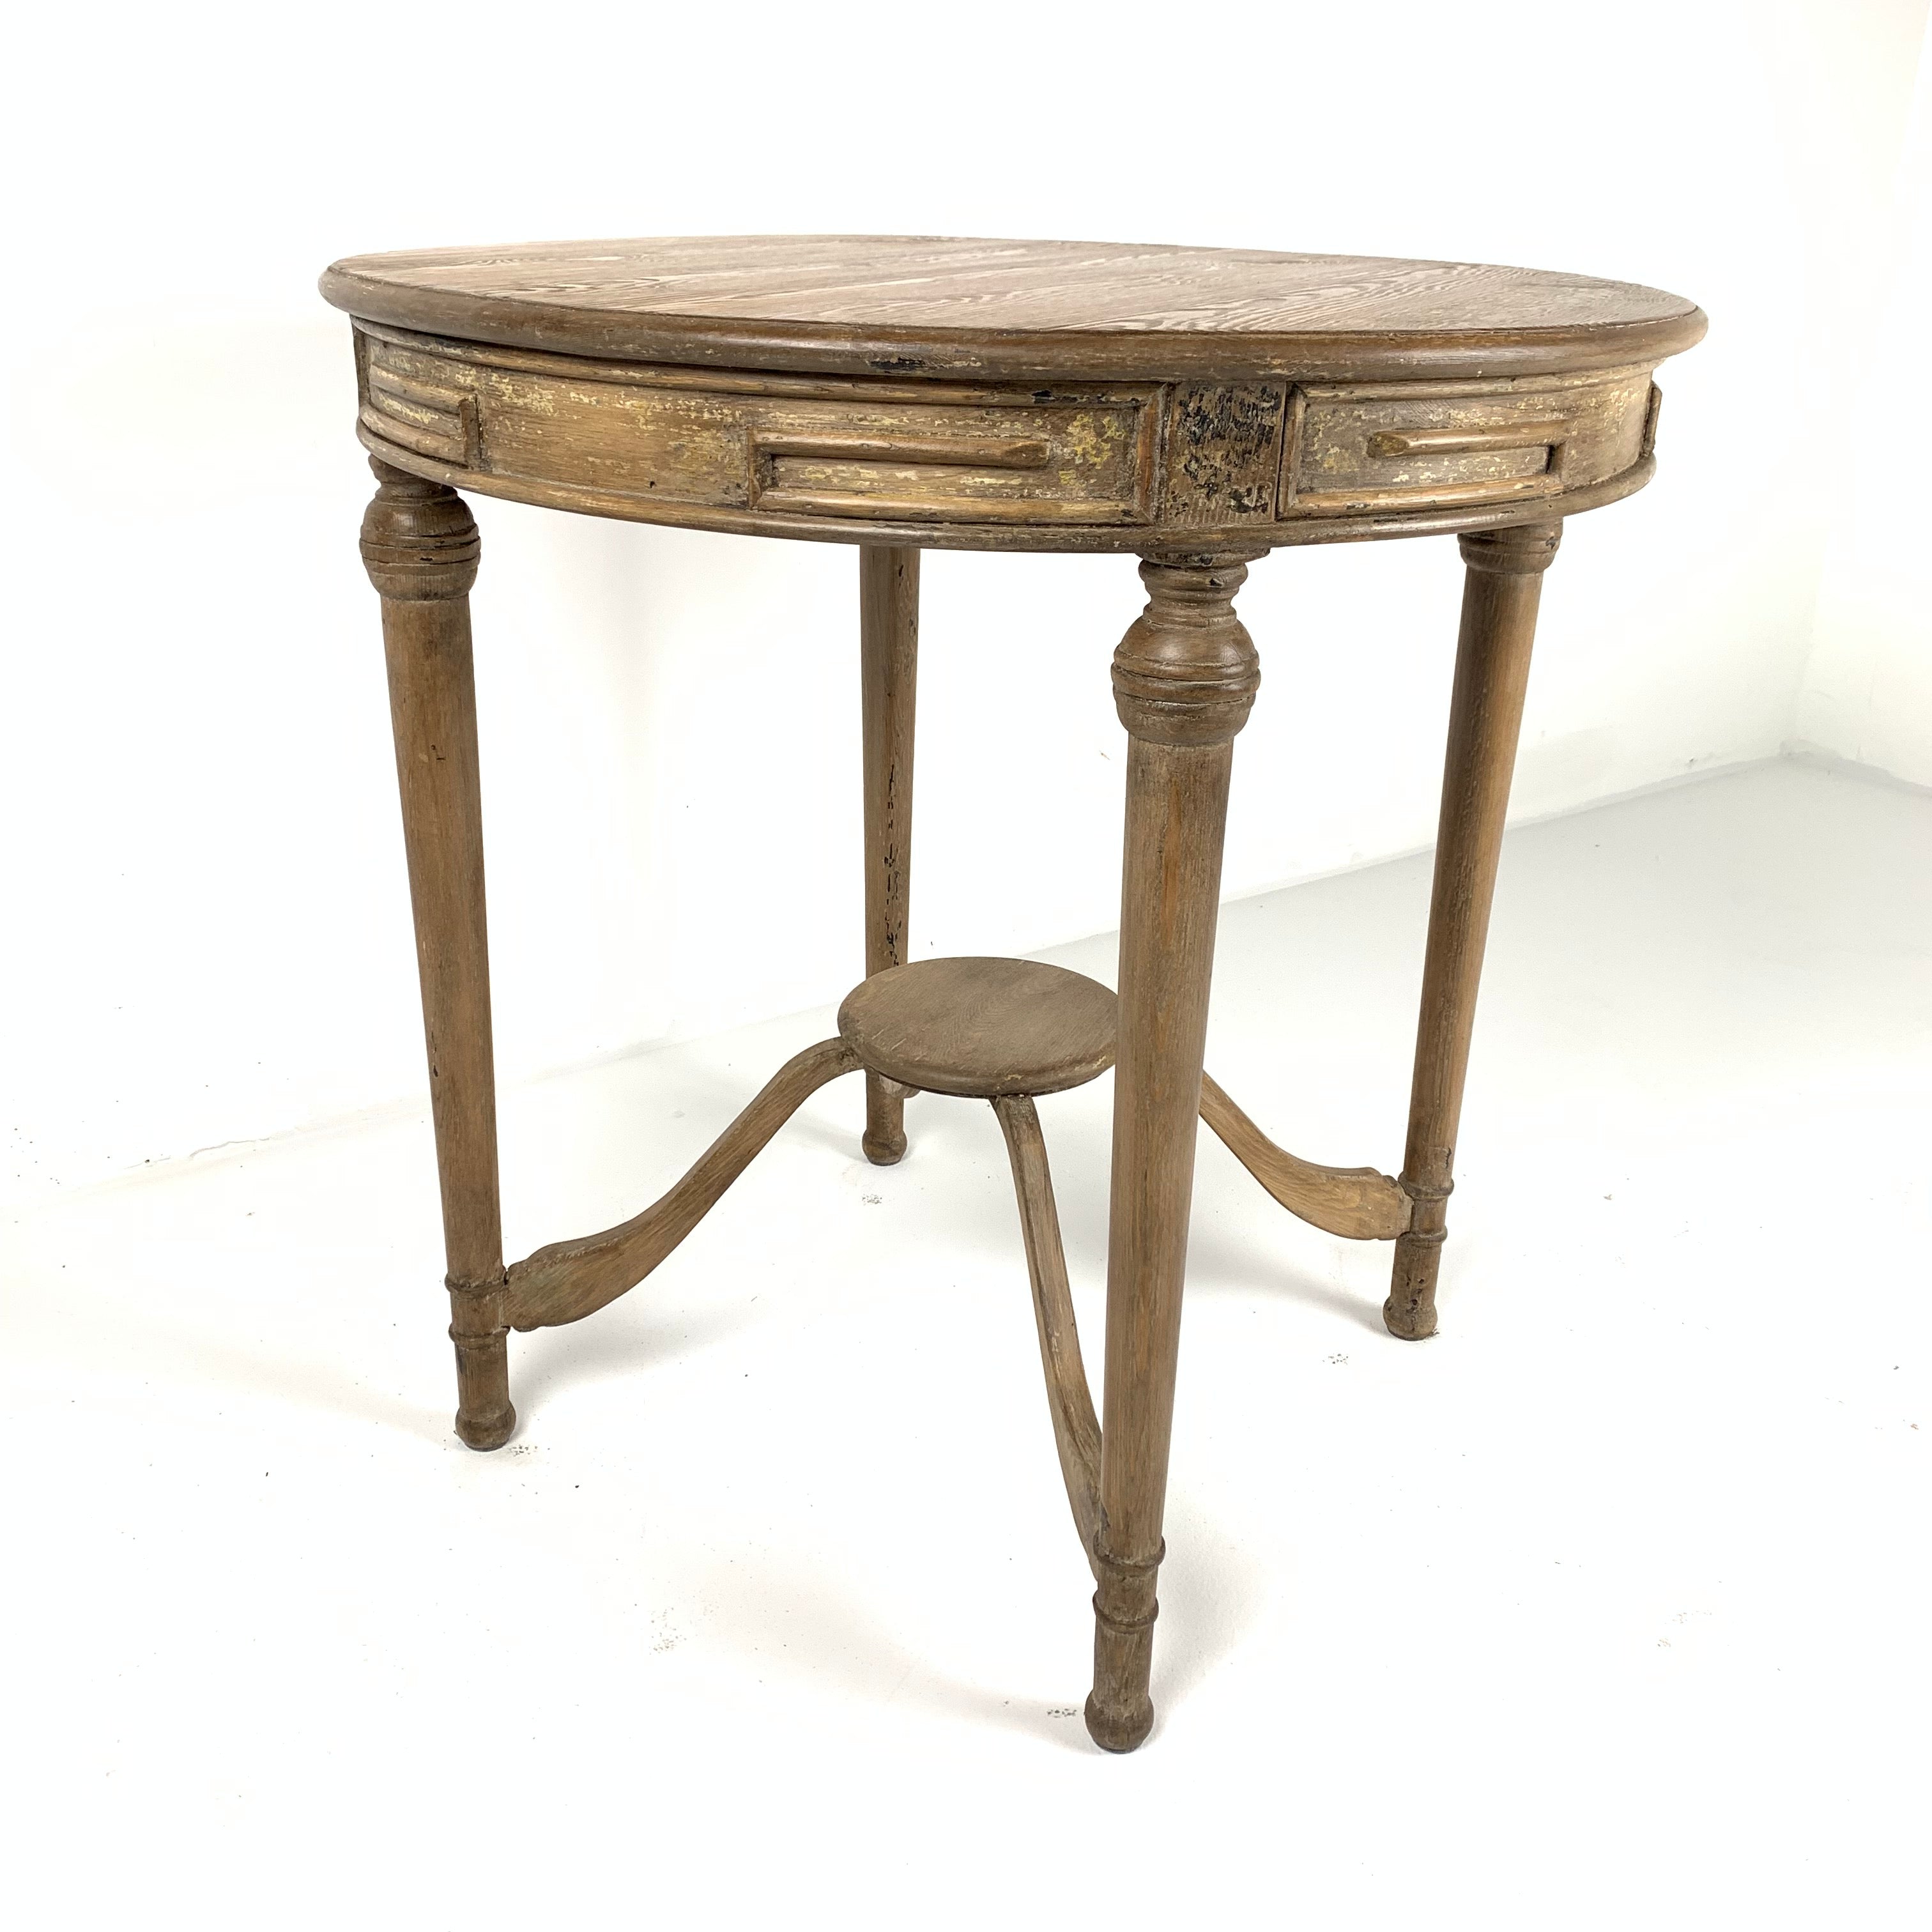 French Pine Tea Table – English Traditions